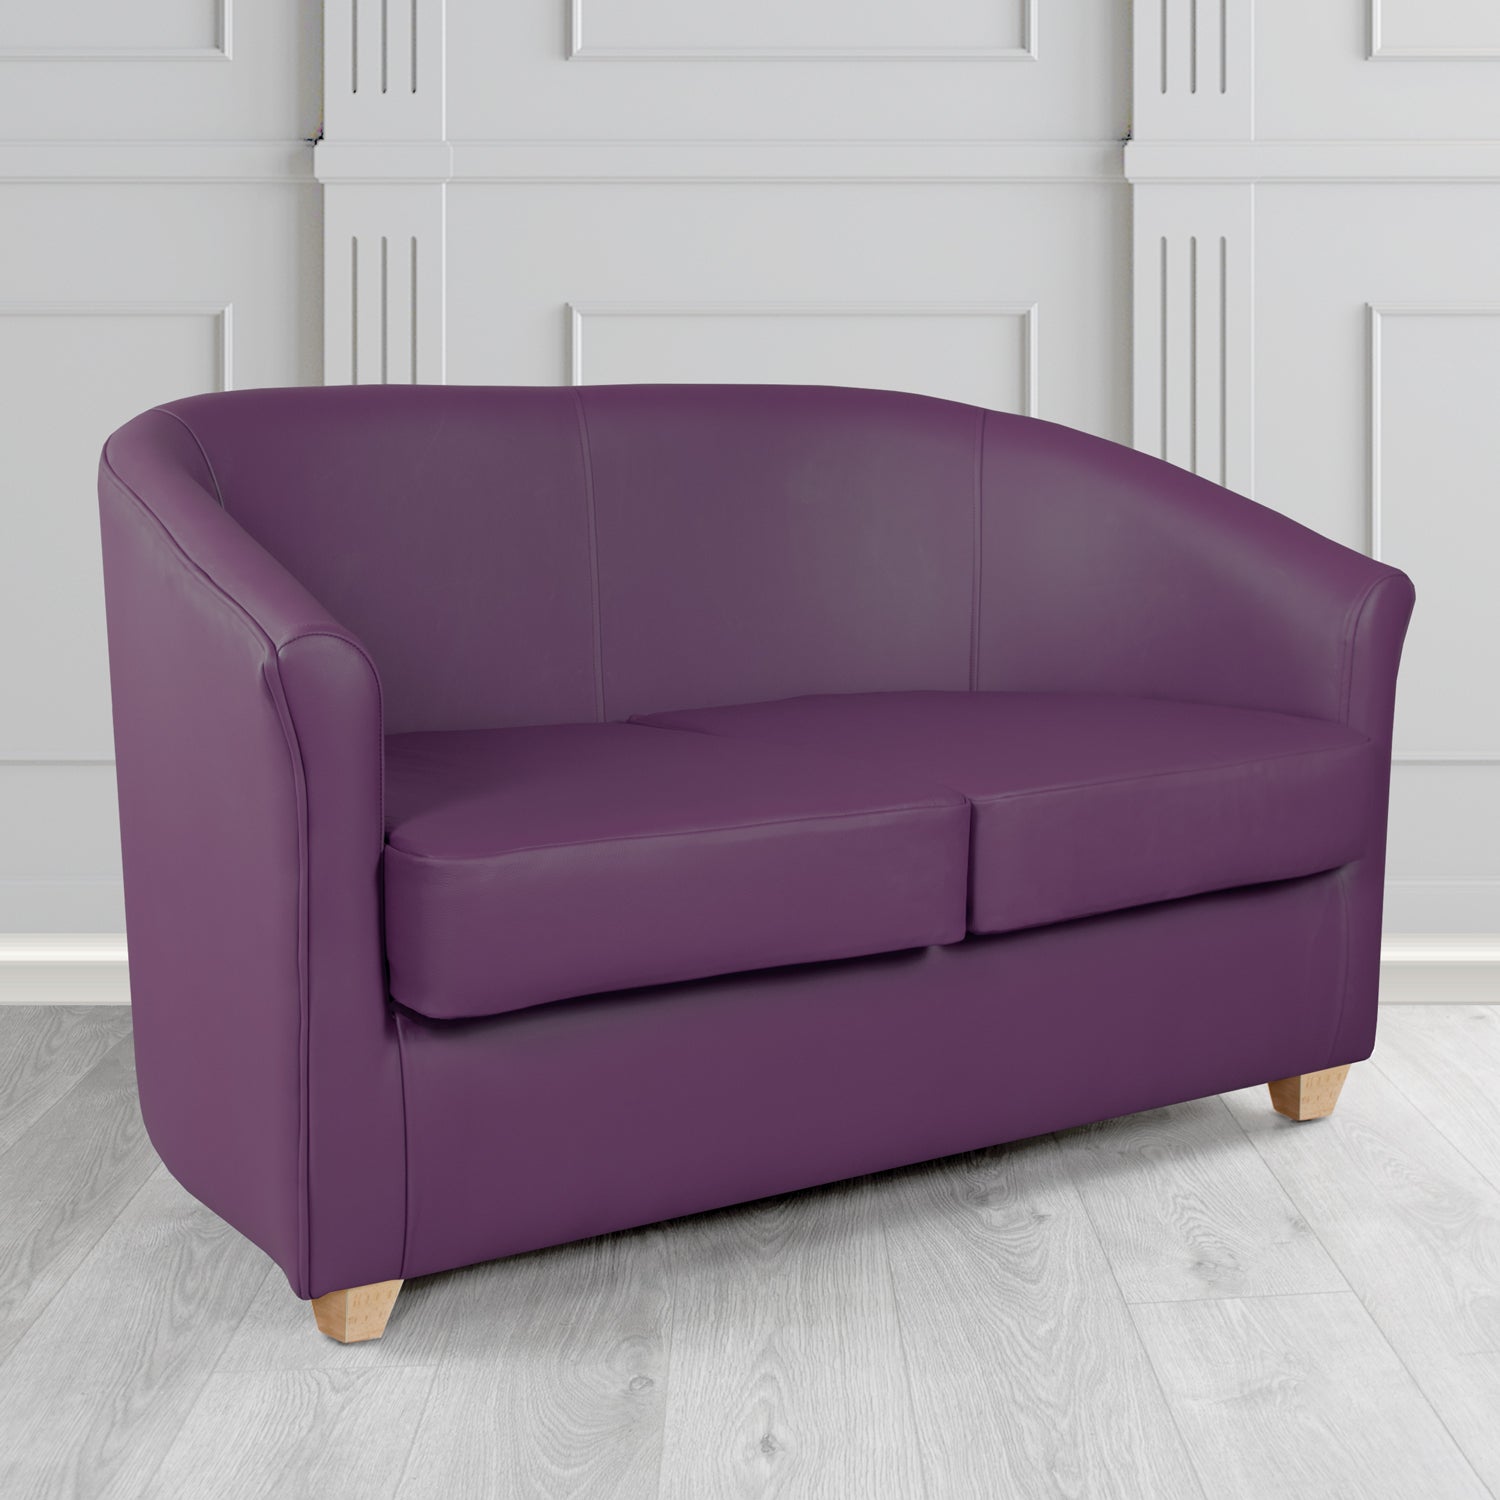 Cannes 2 Seater Tub Sofa in Just Colour Damson Crib 5 Faux Leather